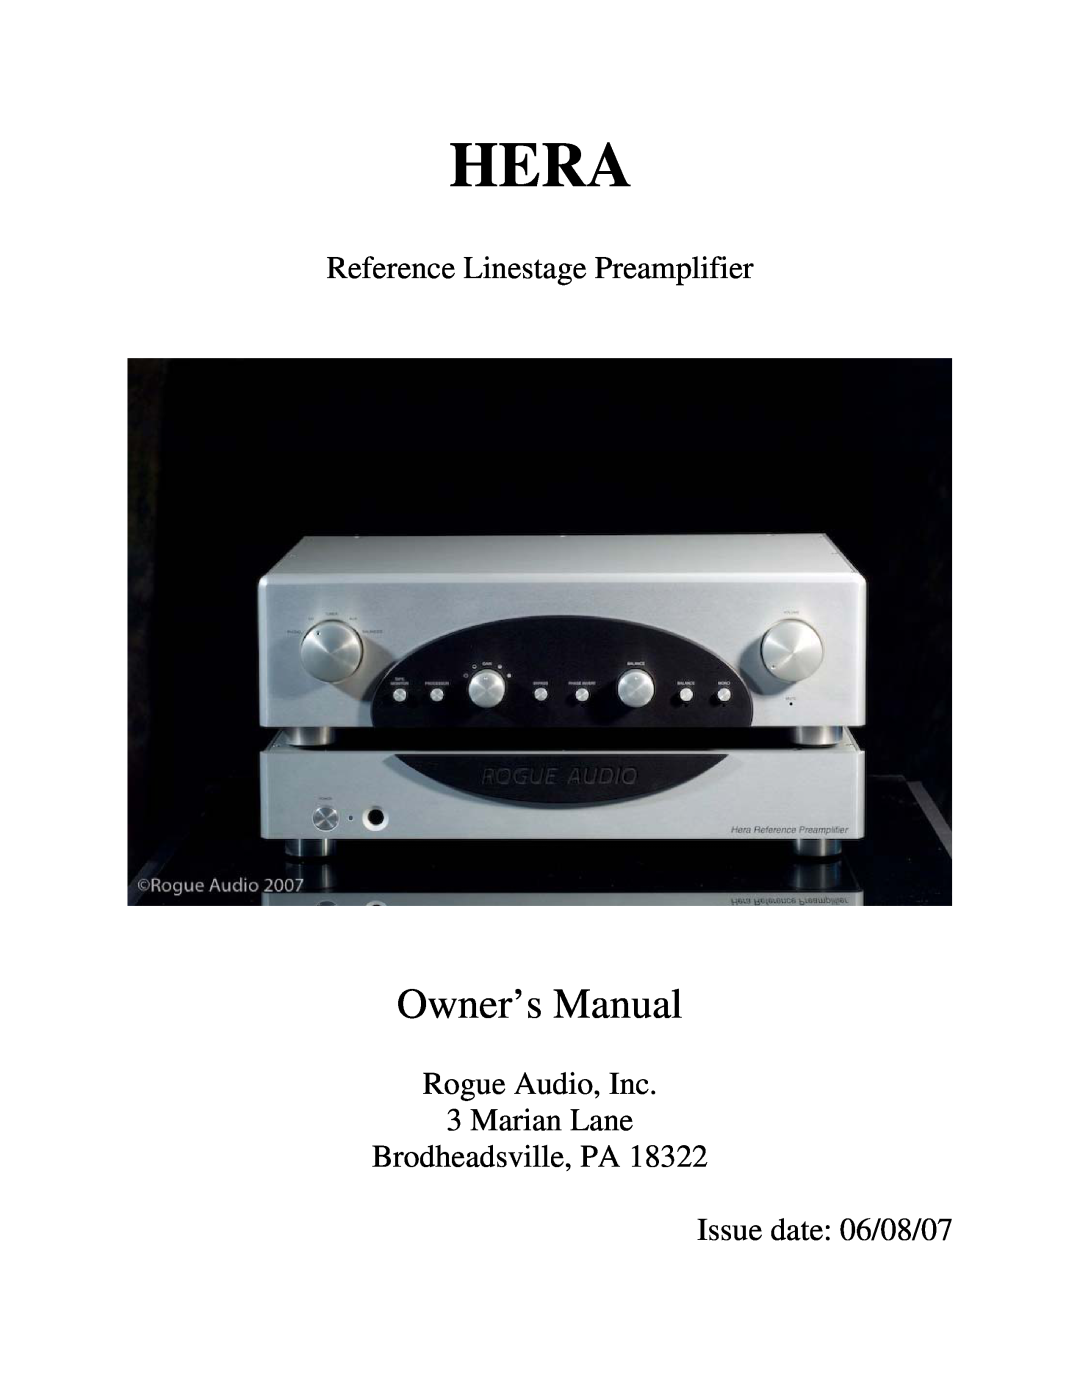 Rogue Audio Hera owner manual Reference Linestage Preamplifier, Rogue Audio, Inc 3 Marian Lane Brodheadsville, PA 